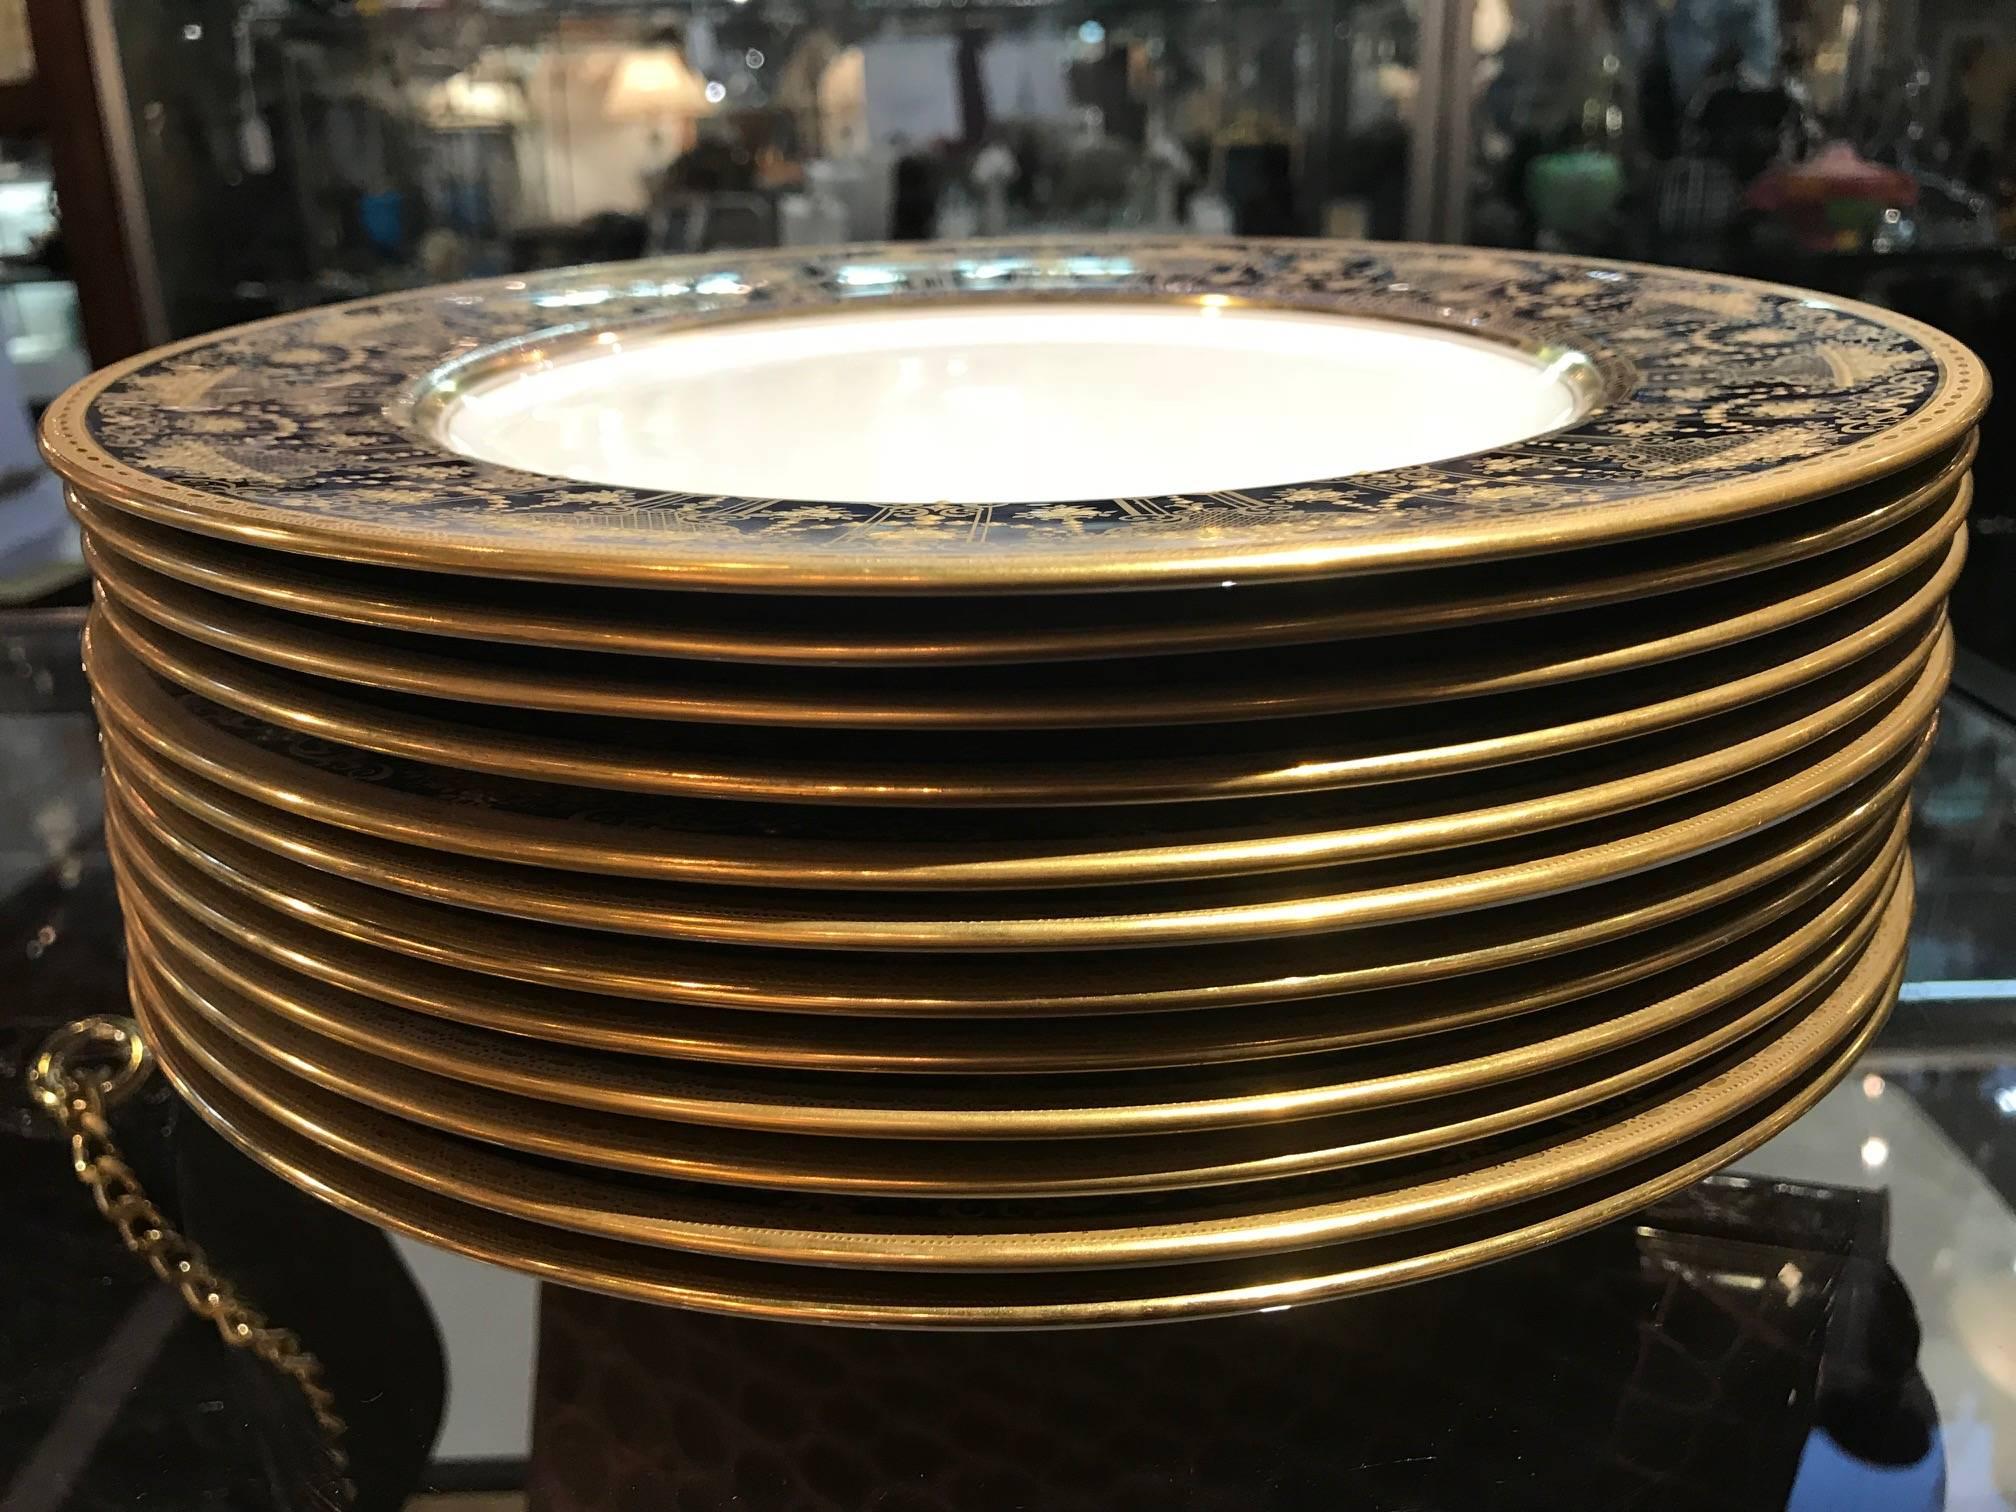 Early 20th Century Set of 12 Luxurious Raised Gilt and Cobalt Service Plates, circa 1910